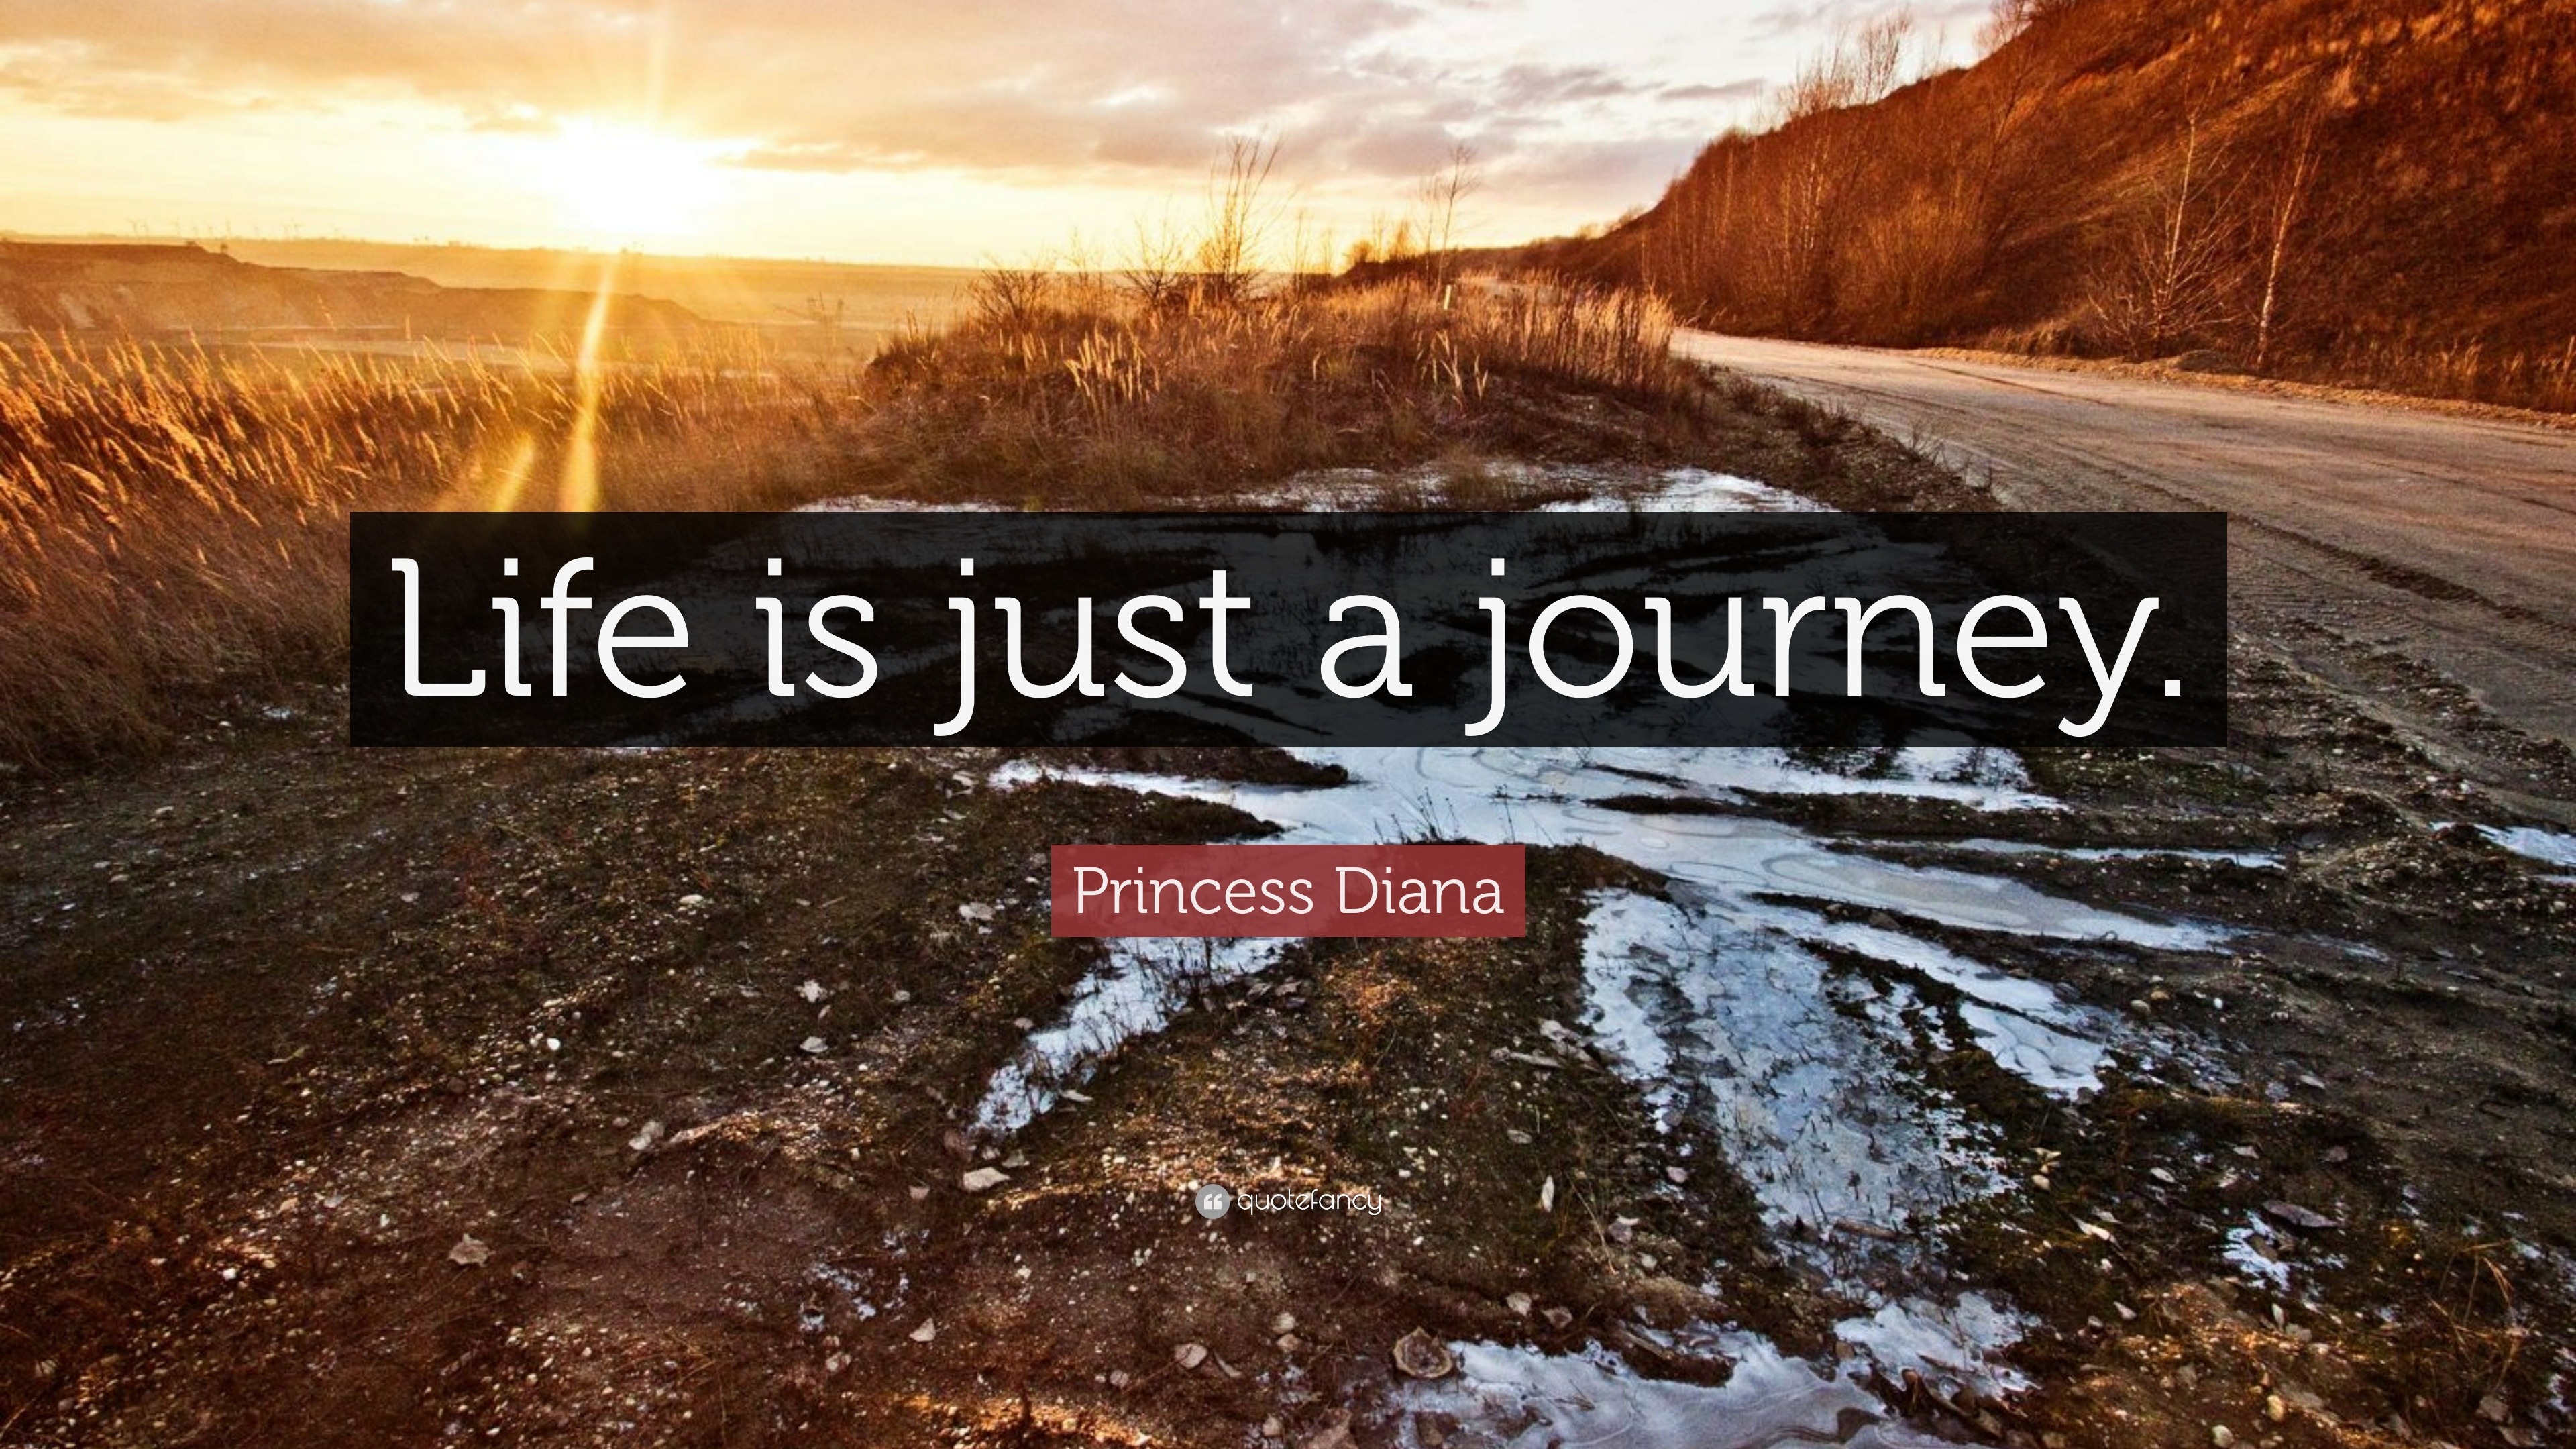 Princess Diana Quote “Life is just a journey ”